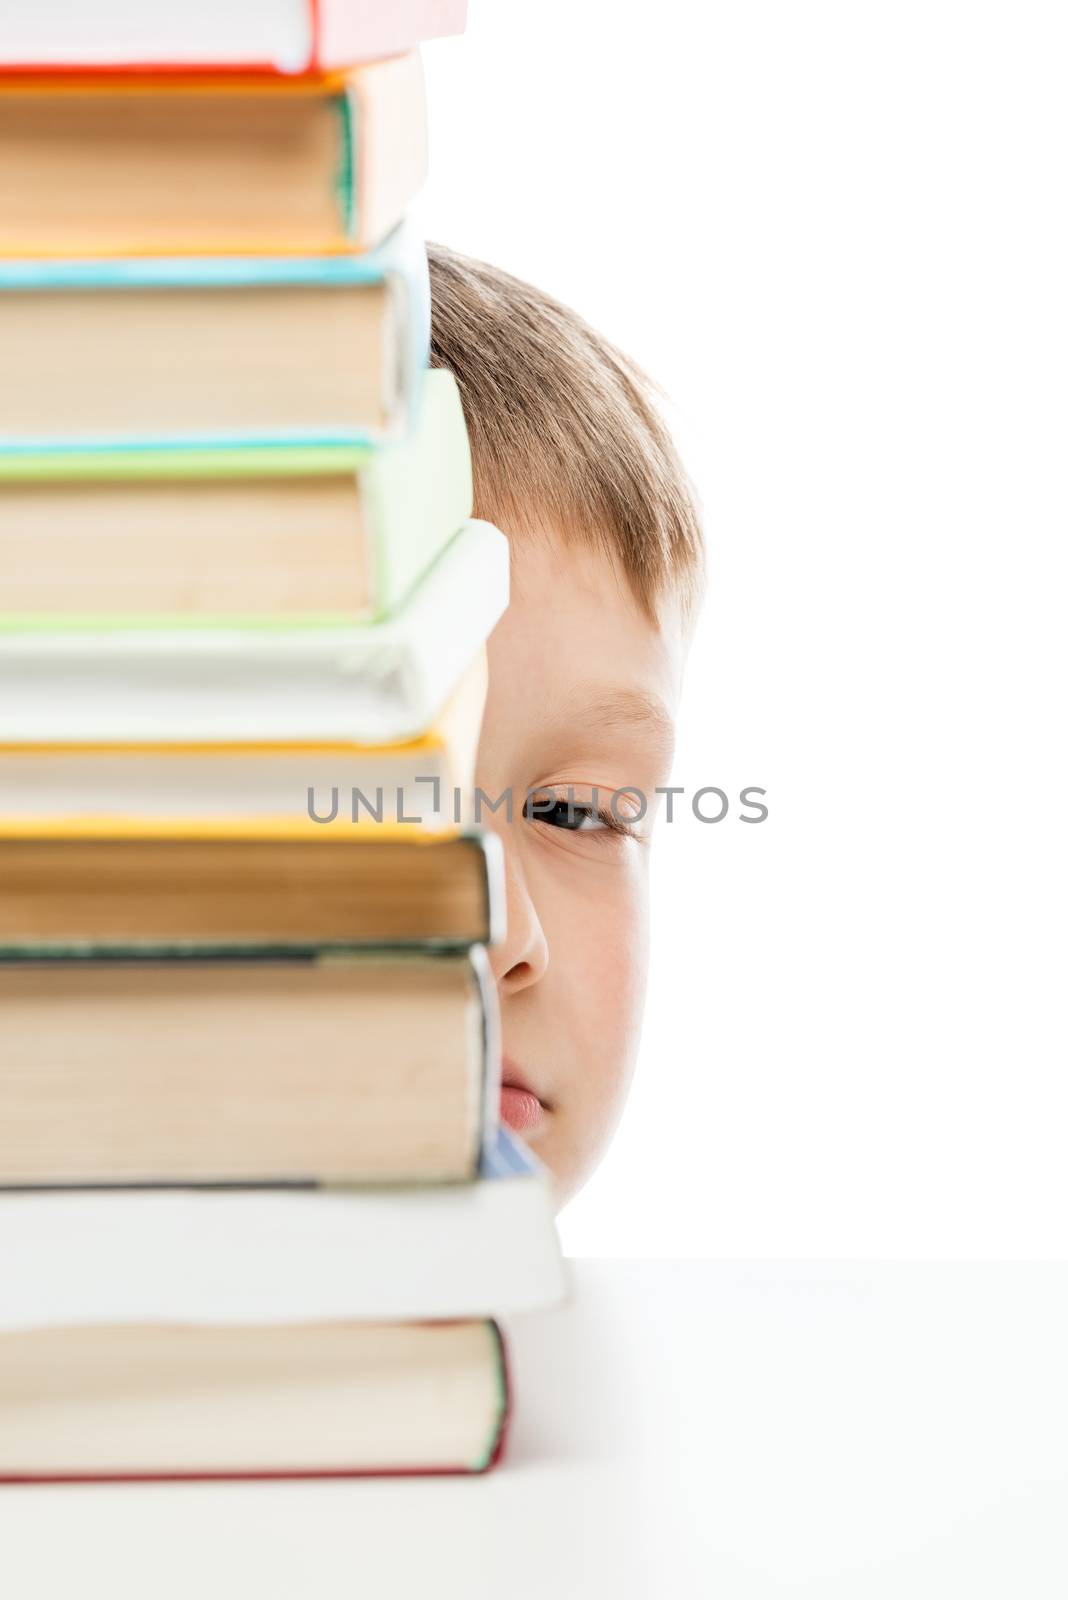 pile of books to read on the table and peeping out from behind the books the schoolboy